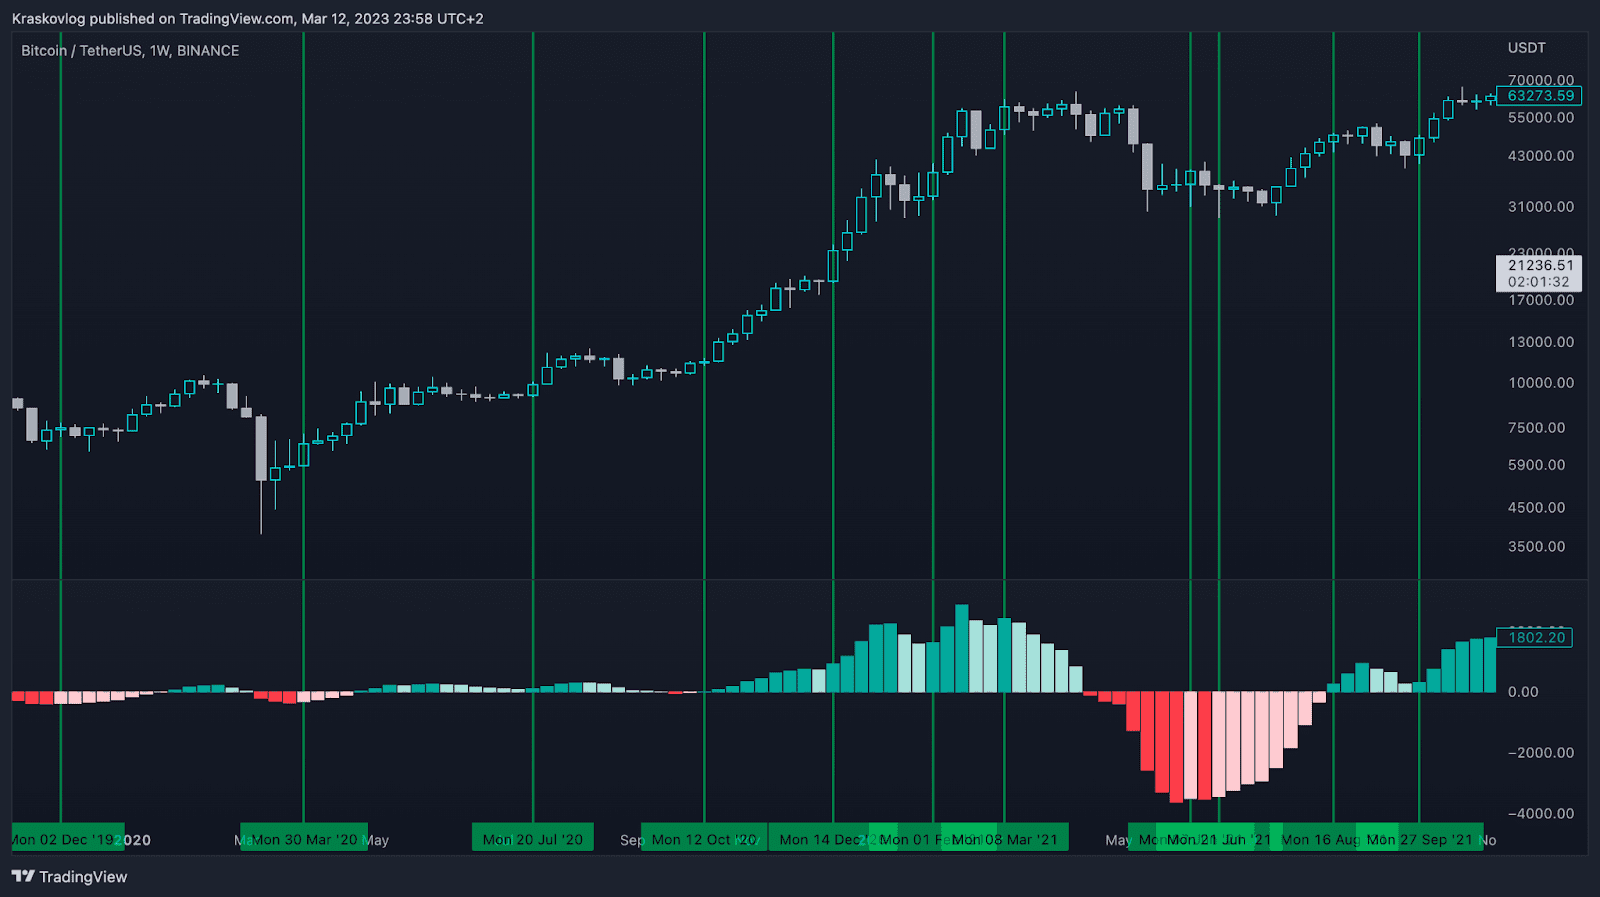 MACD indicator for crypto trading